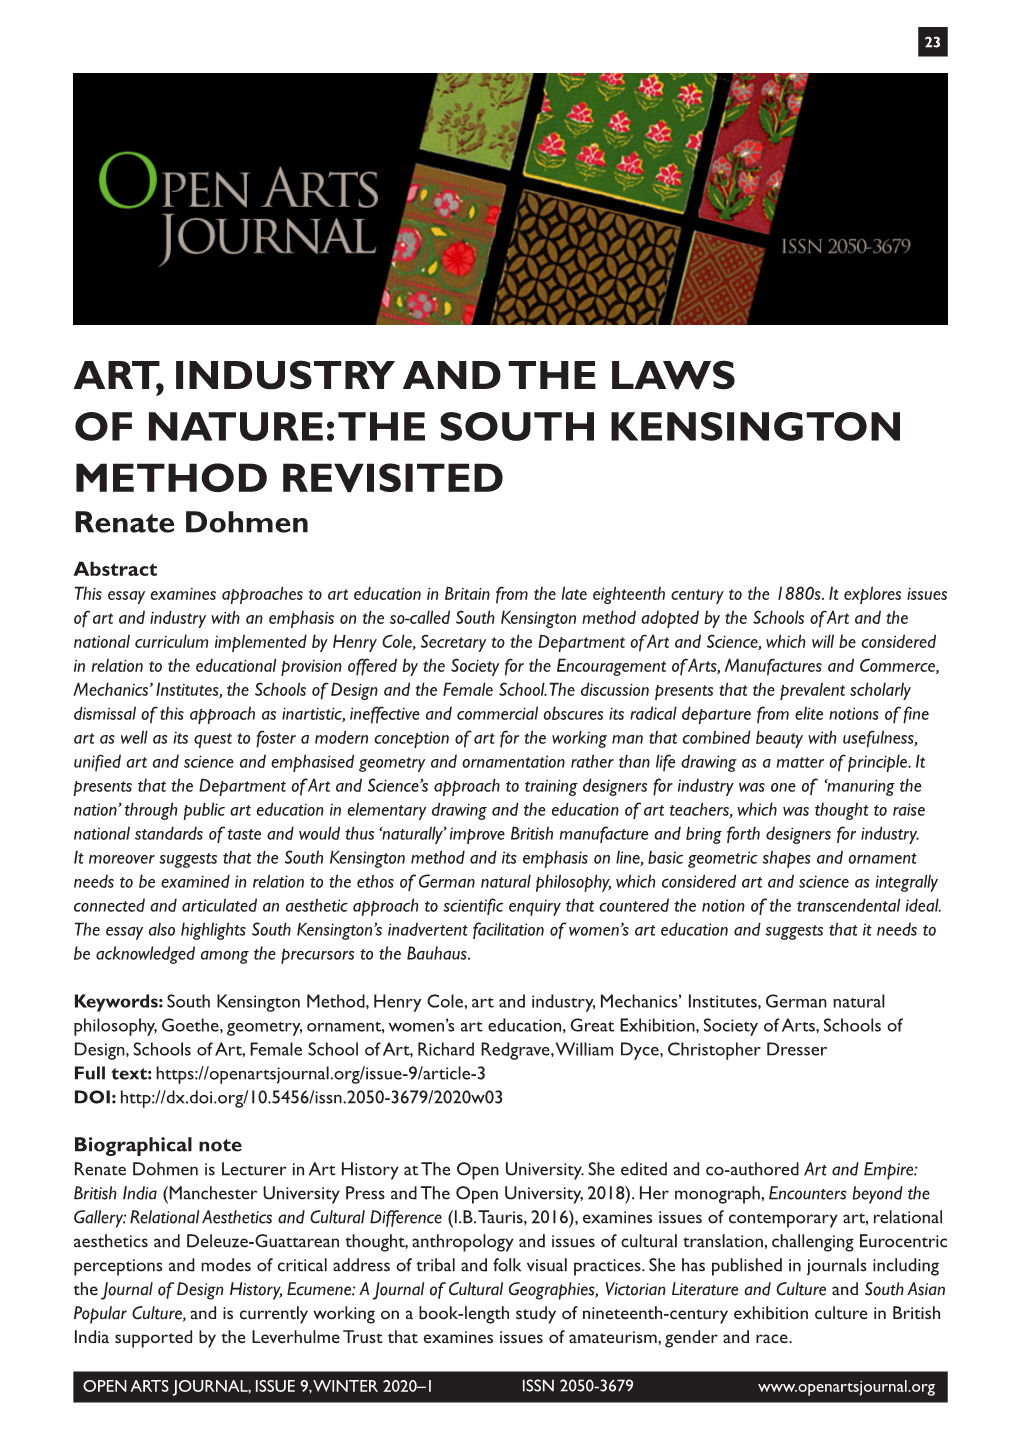 Art, Industry and the Laws of Nature: the South Kensington Method Revisited